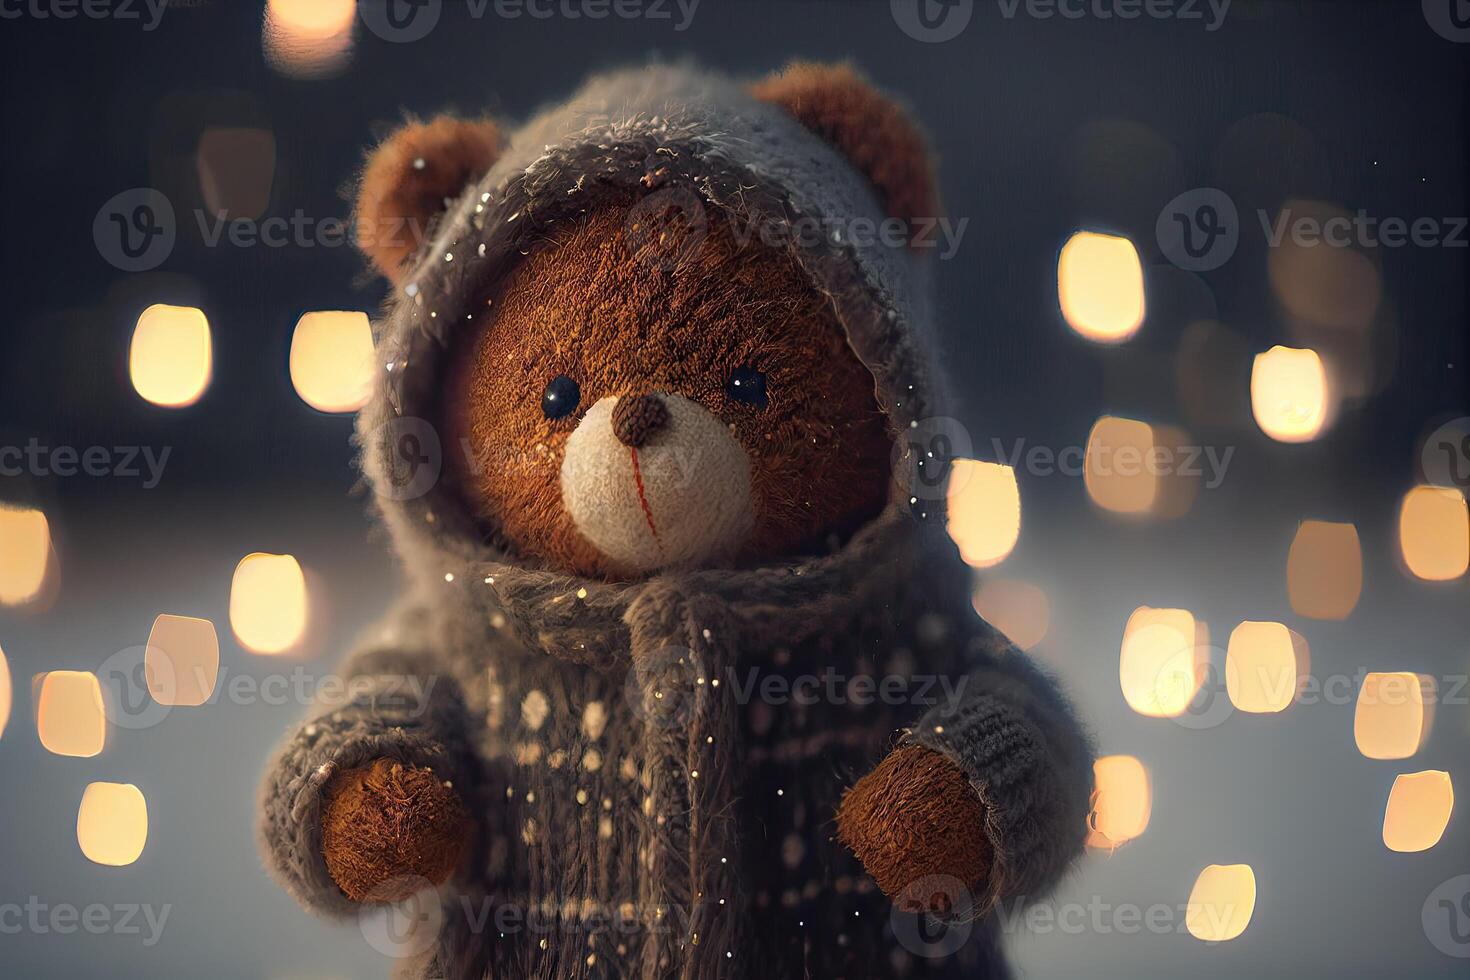 The toy bear was left in the winter at the children's playground. A cute brown bear sitting alone on the snow during winter time. photo